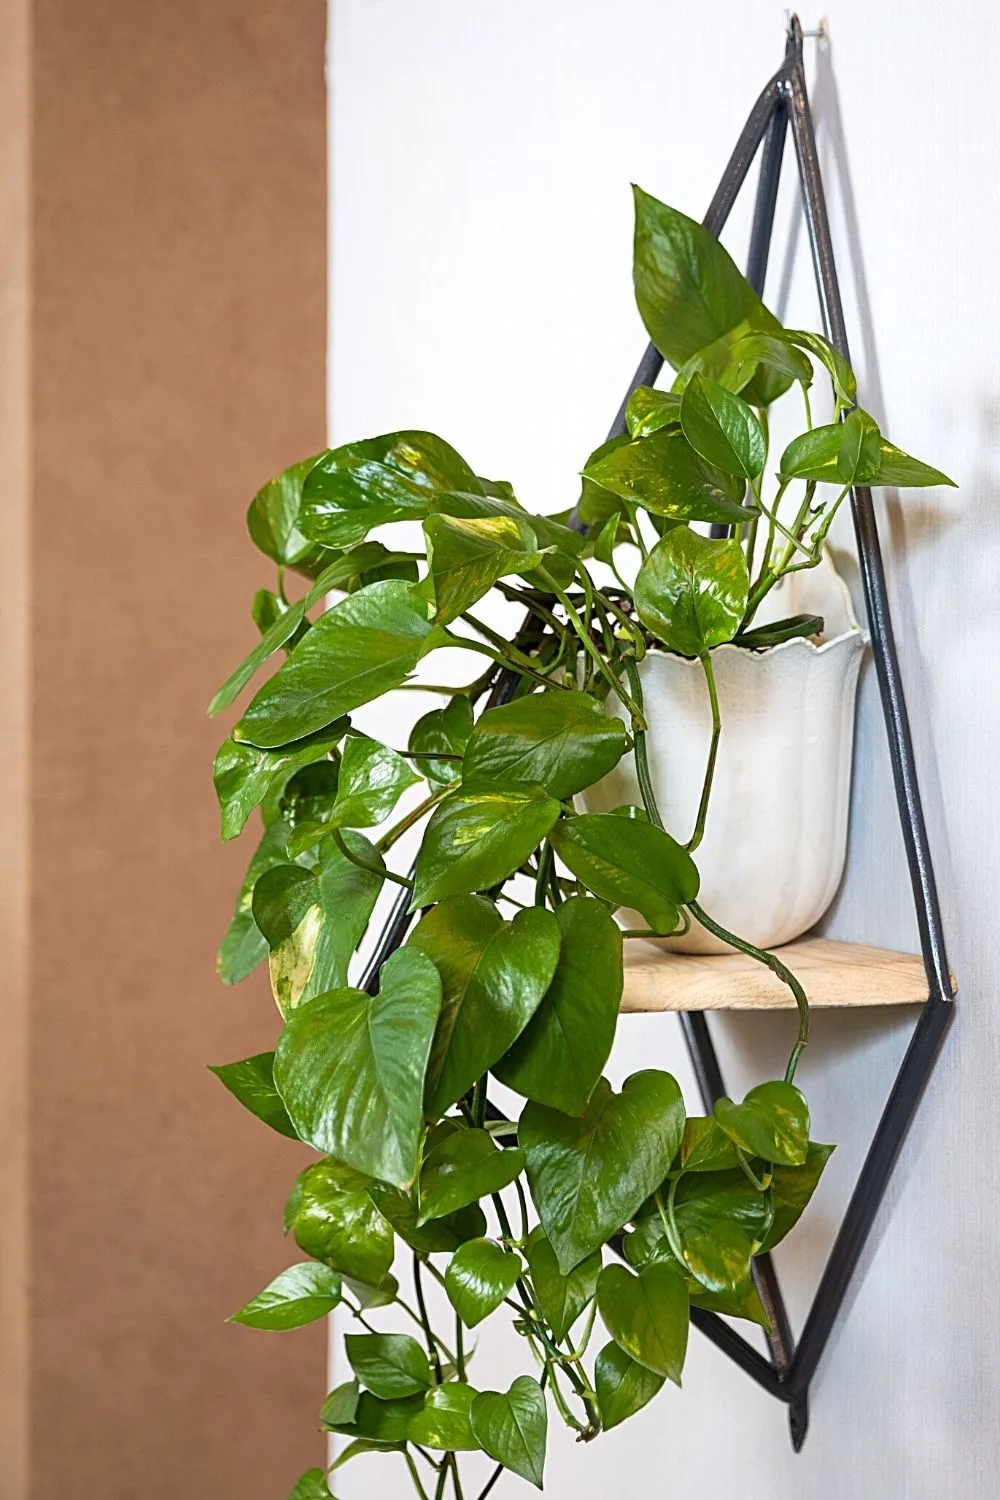 Devil's Ivy is a beginner-friendly plant that you can place by your northwest-facing window